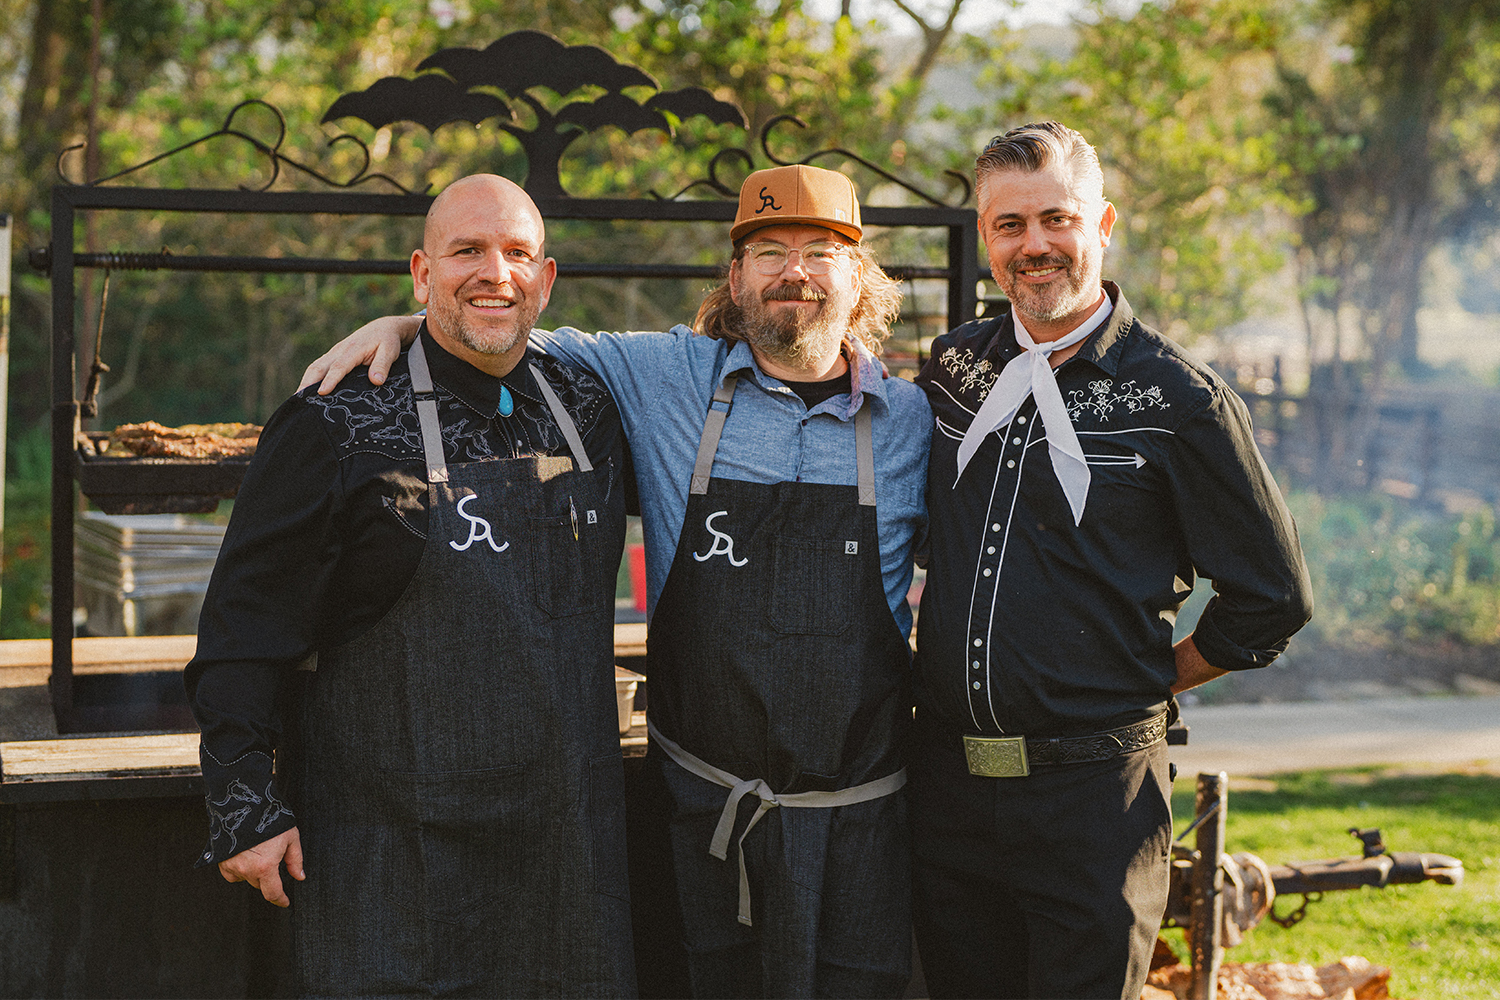 Chef Neal Fraser, pictured in the center with a hat, has his arms around two people at his annual Beefsteak event in 2022